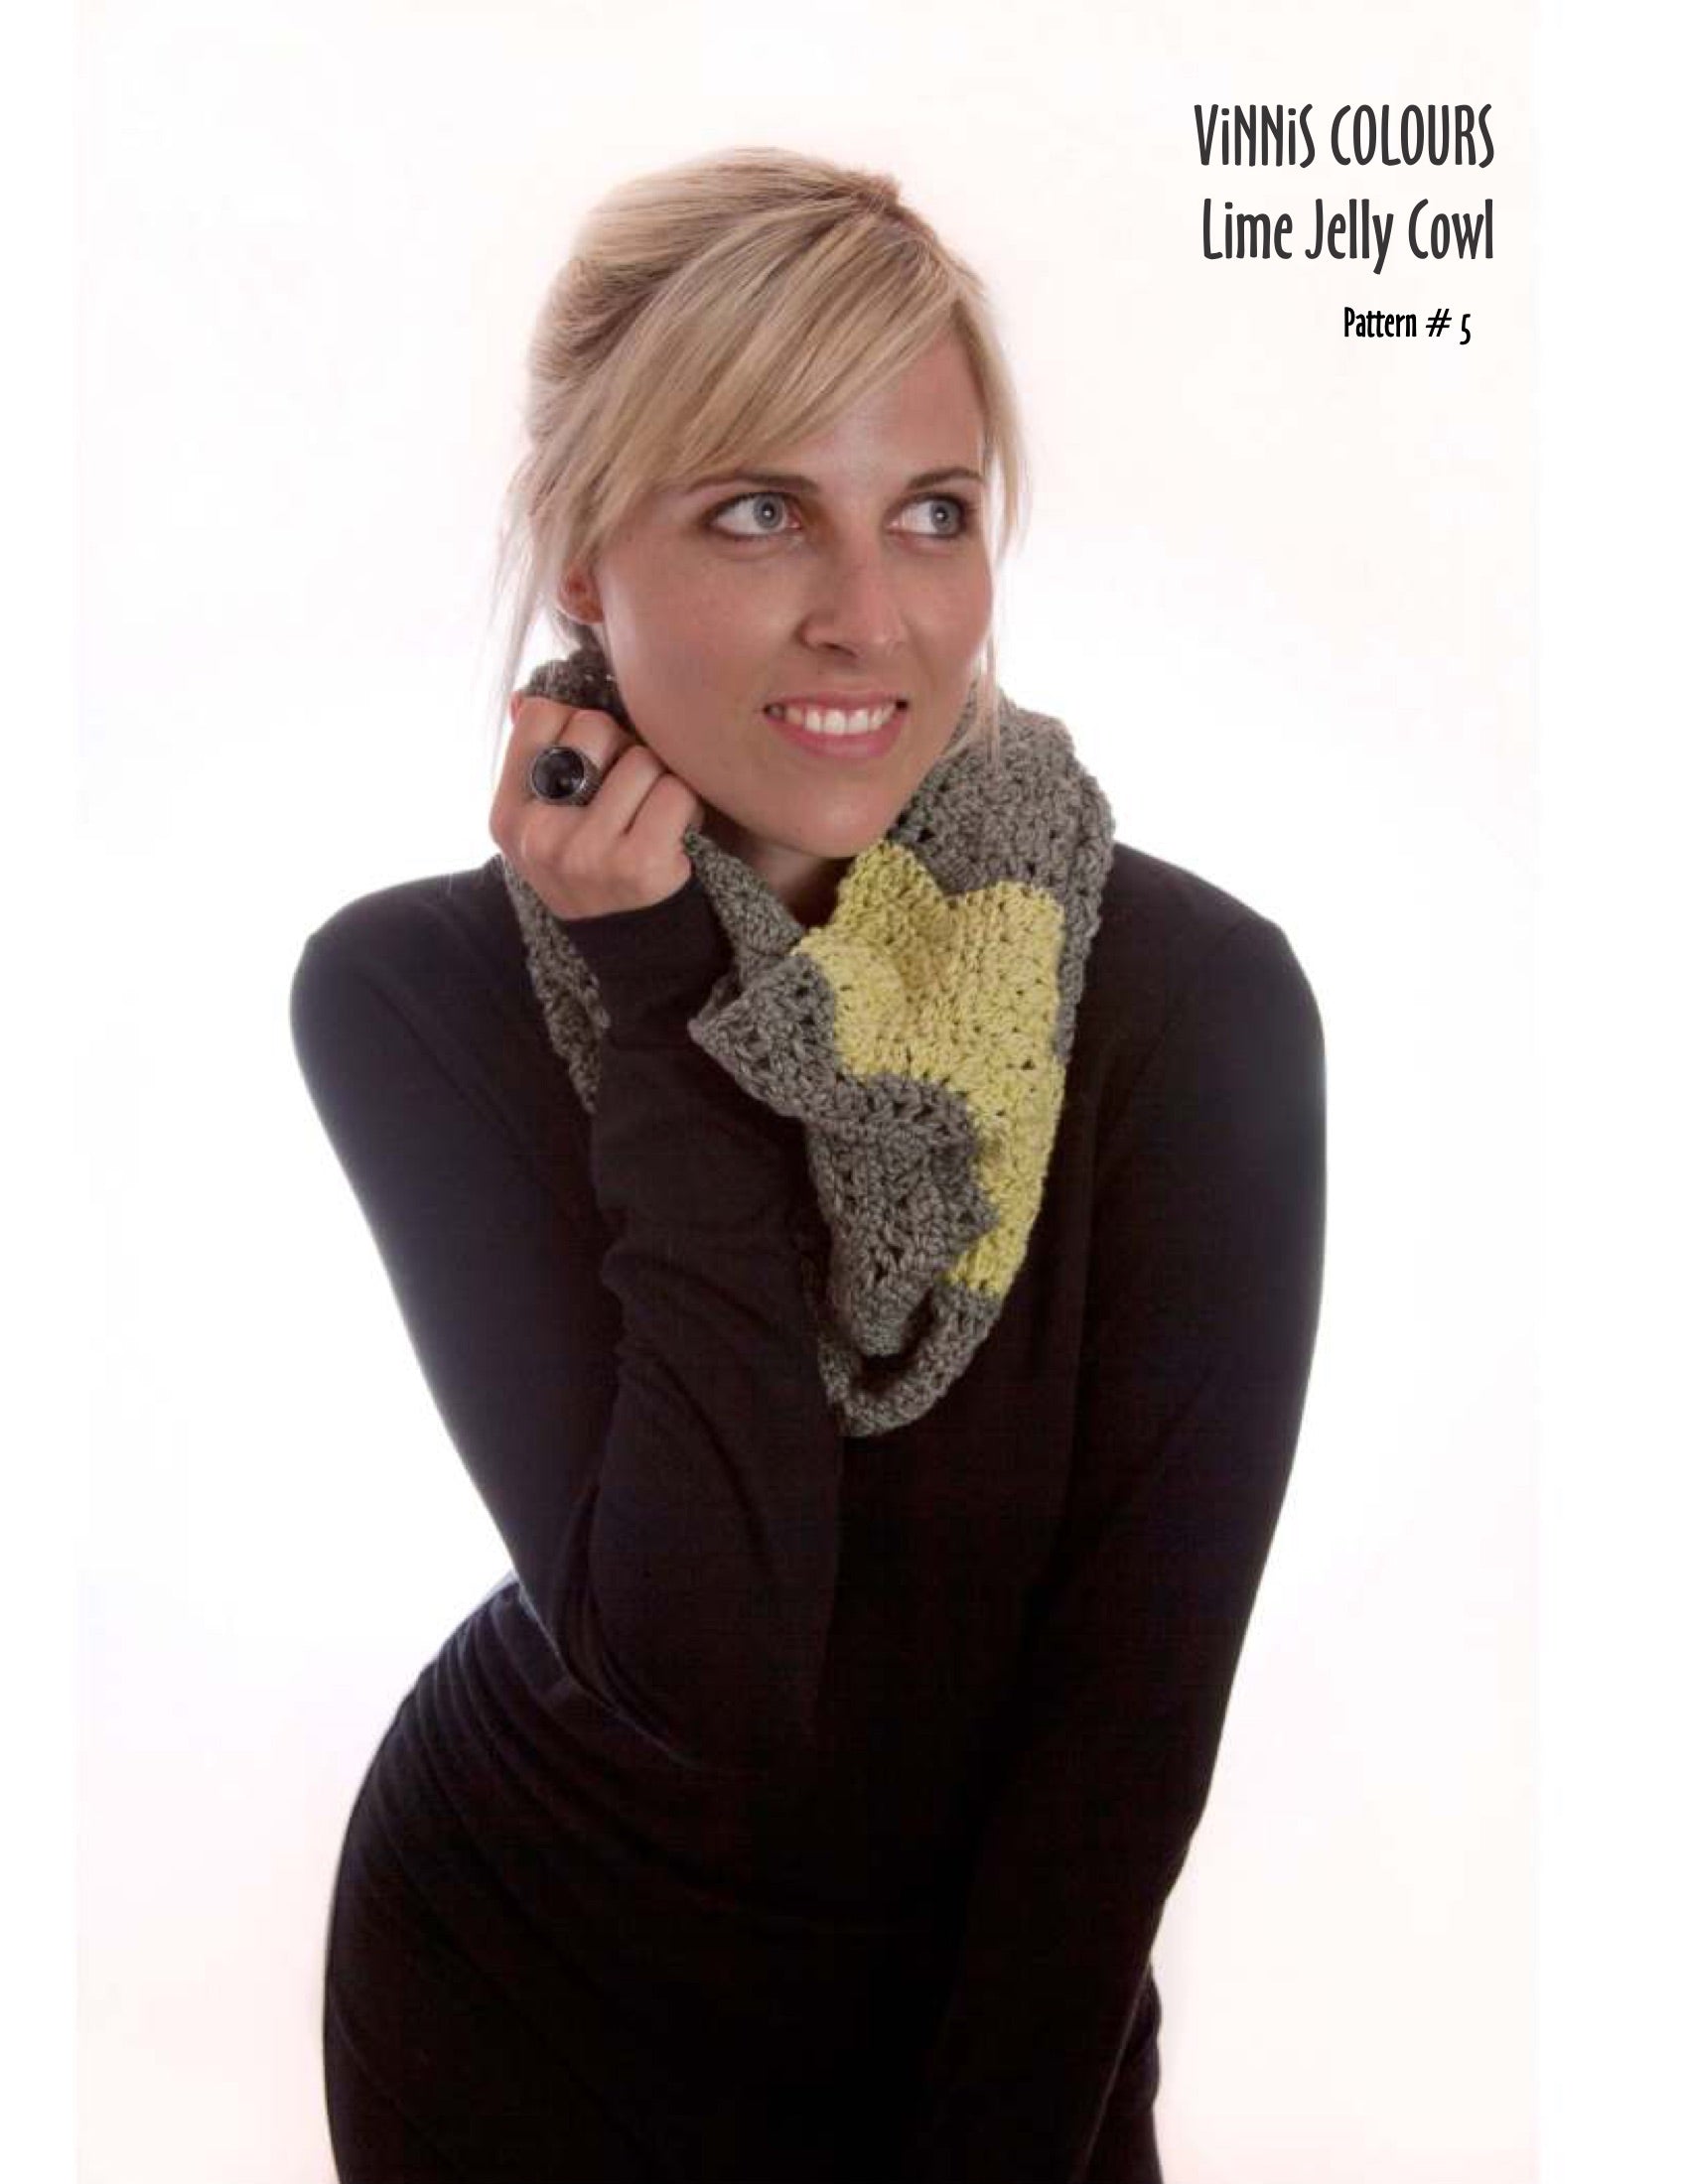 VCDL - P005 - Lime Jelly Cowl